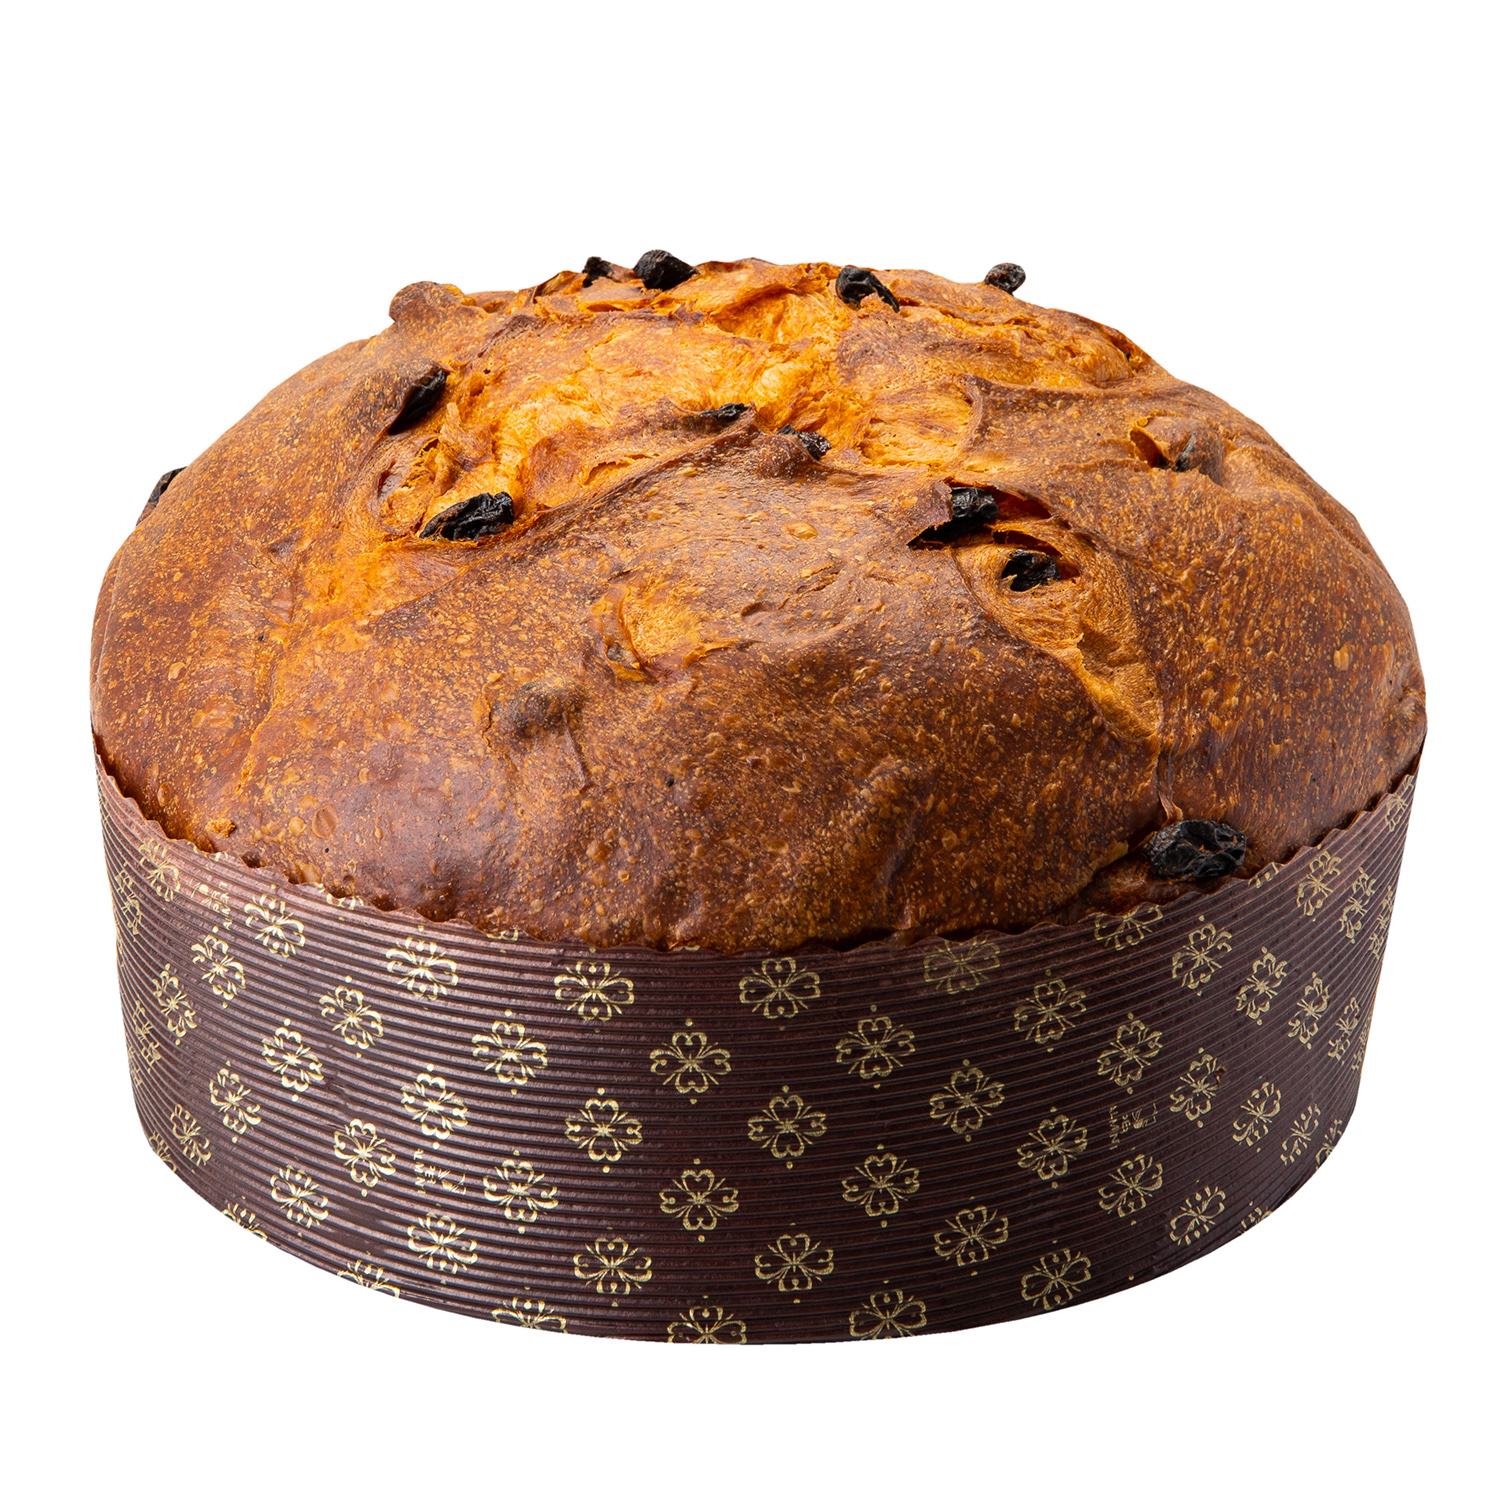 Panettone Baked goods